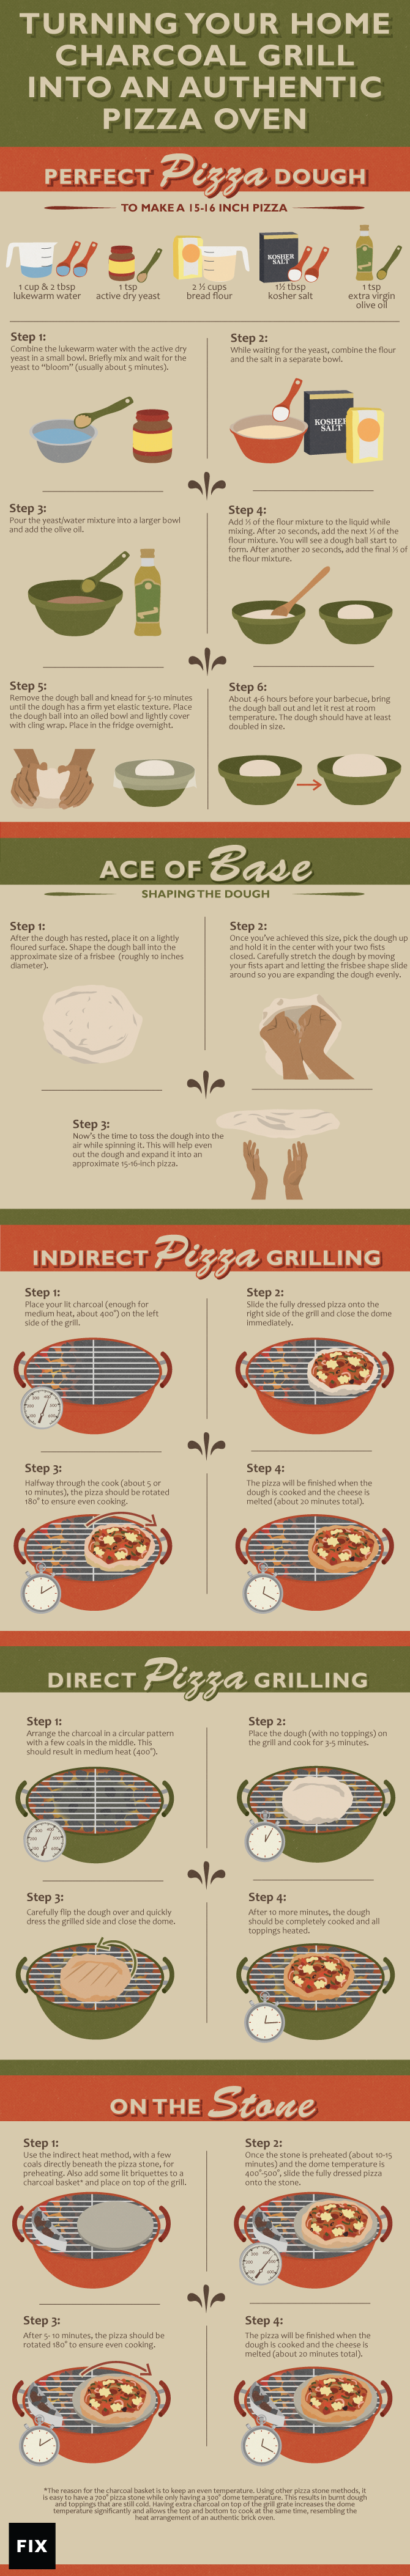 pizza-grilling-embed-large.png